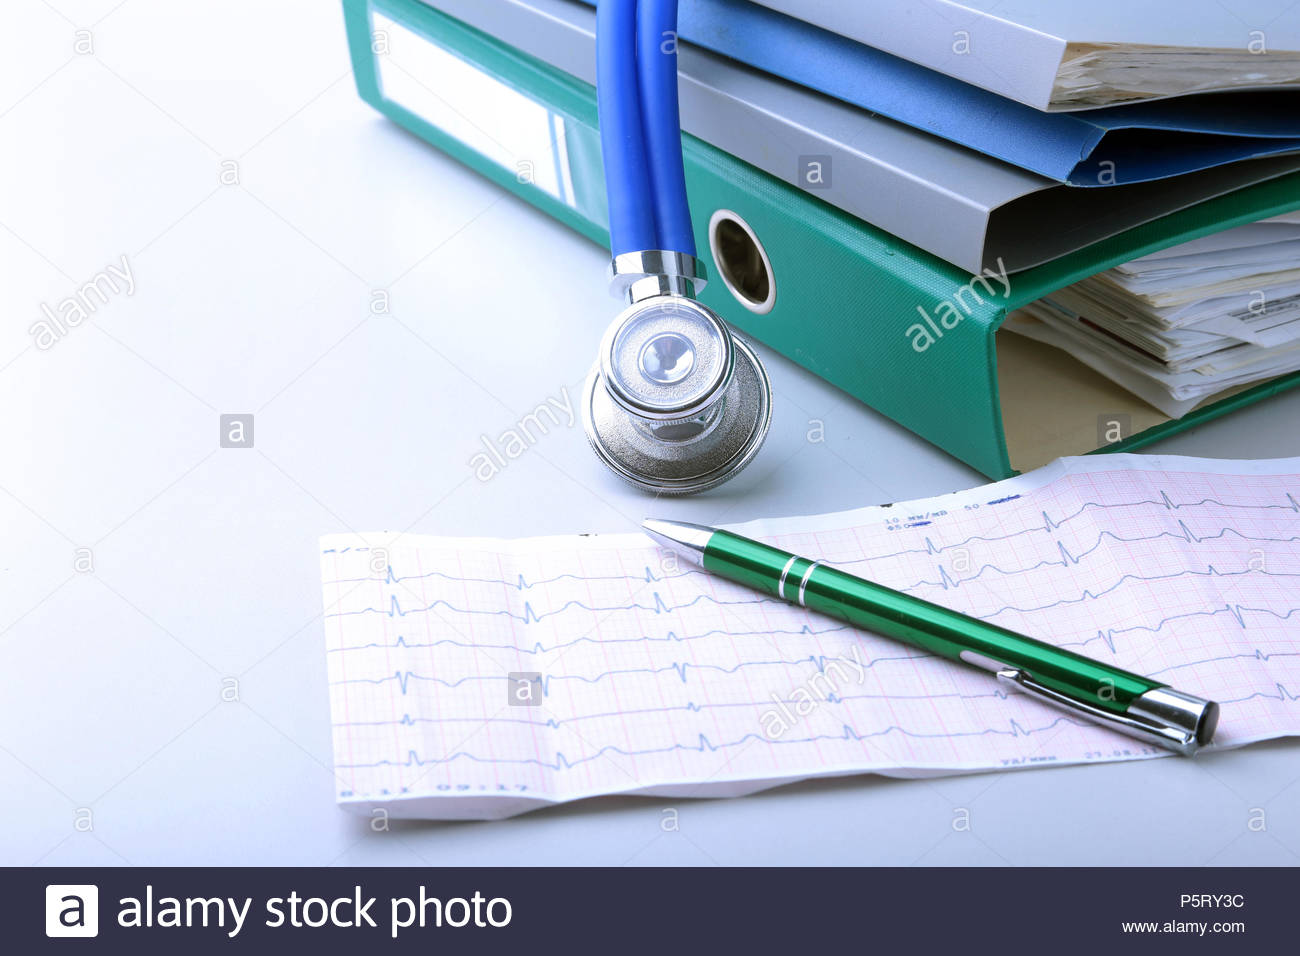 Books Folder File Stethoscope And Rx Prescription Isolated On